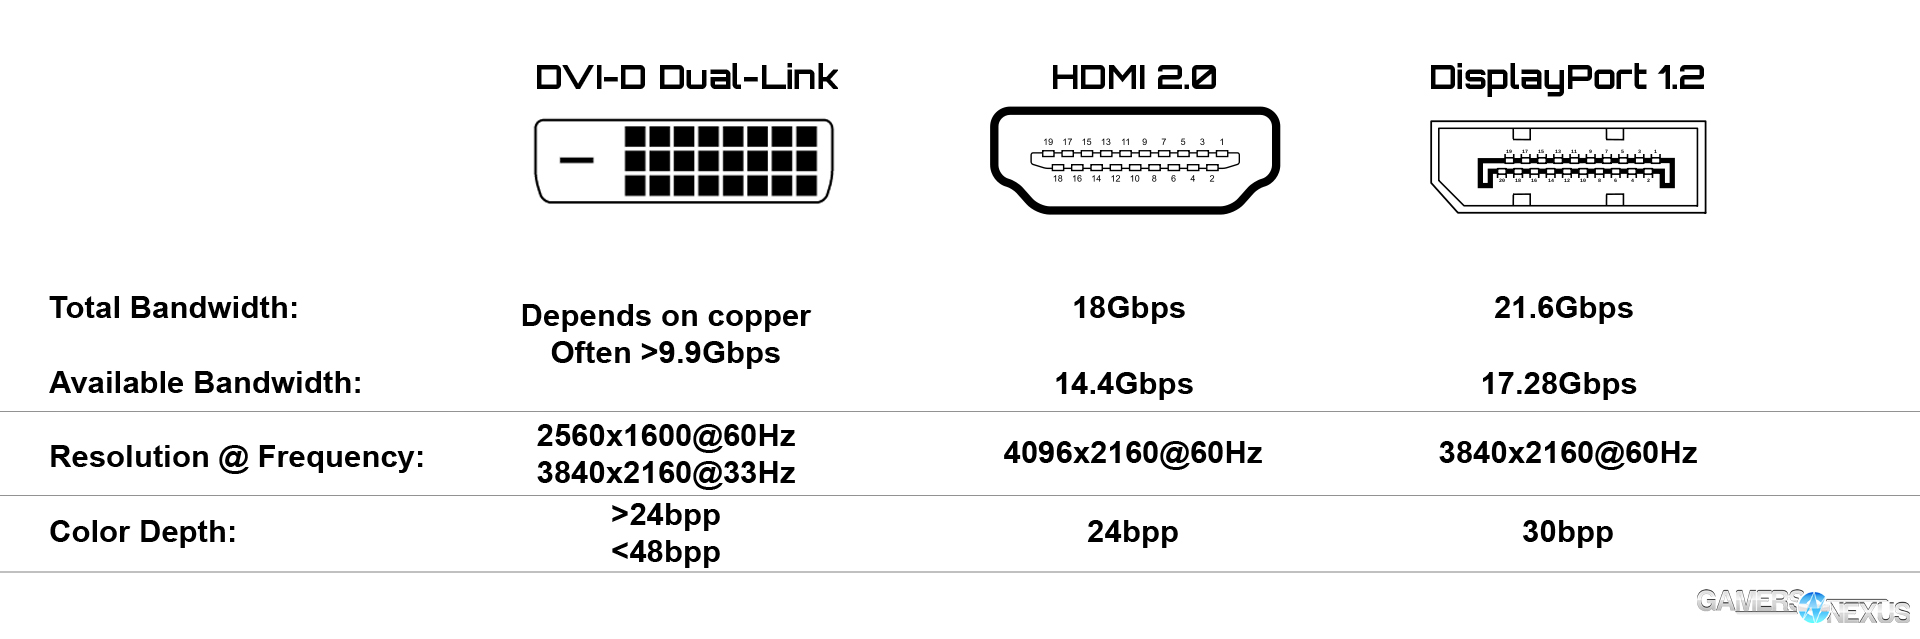 DisplayPort vs HDMI: Which is Better?